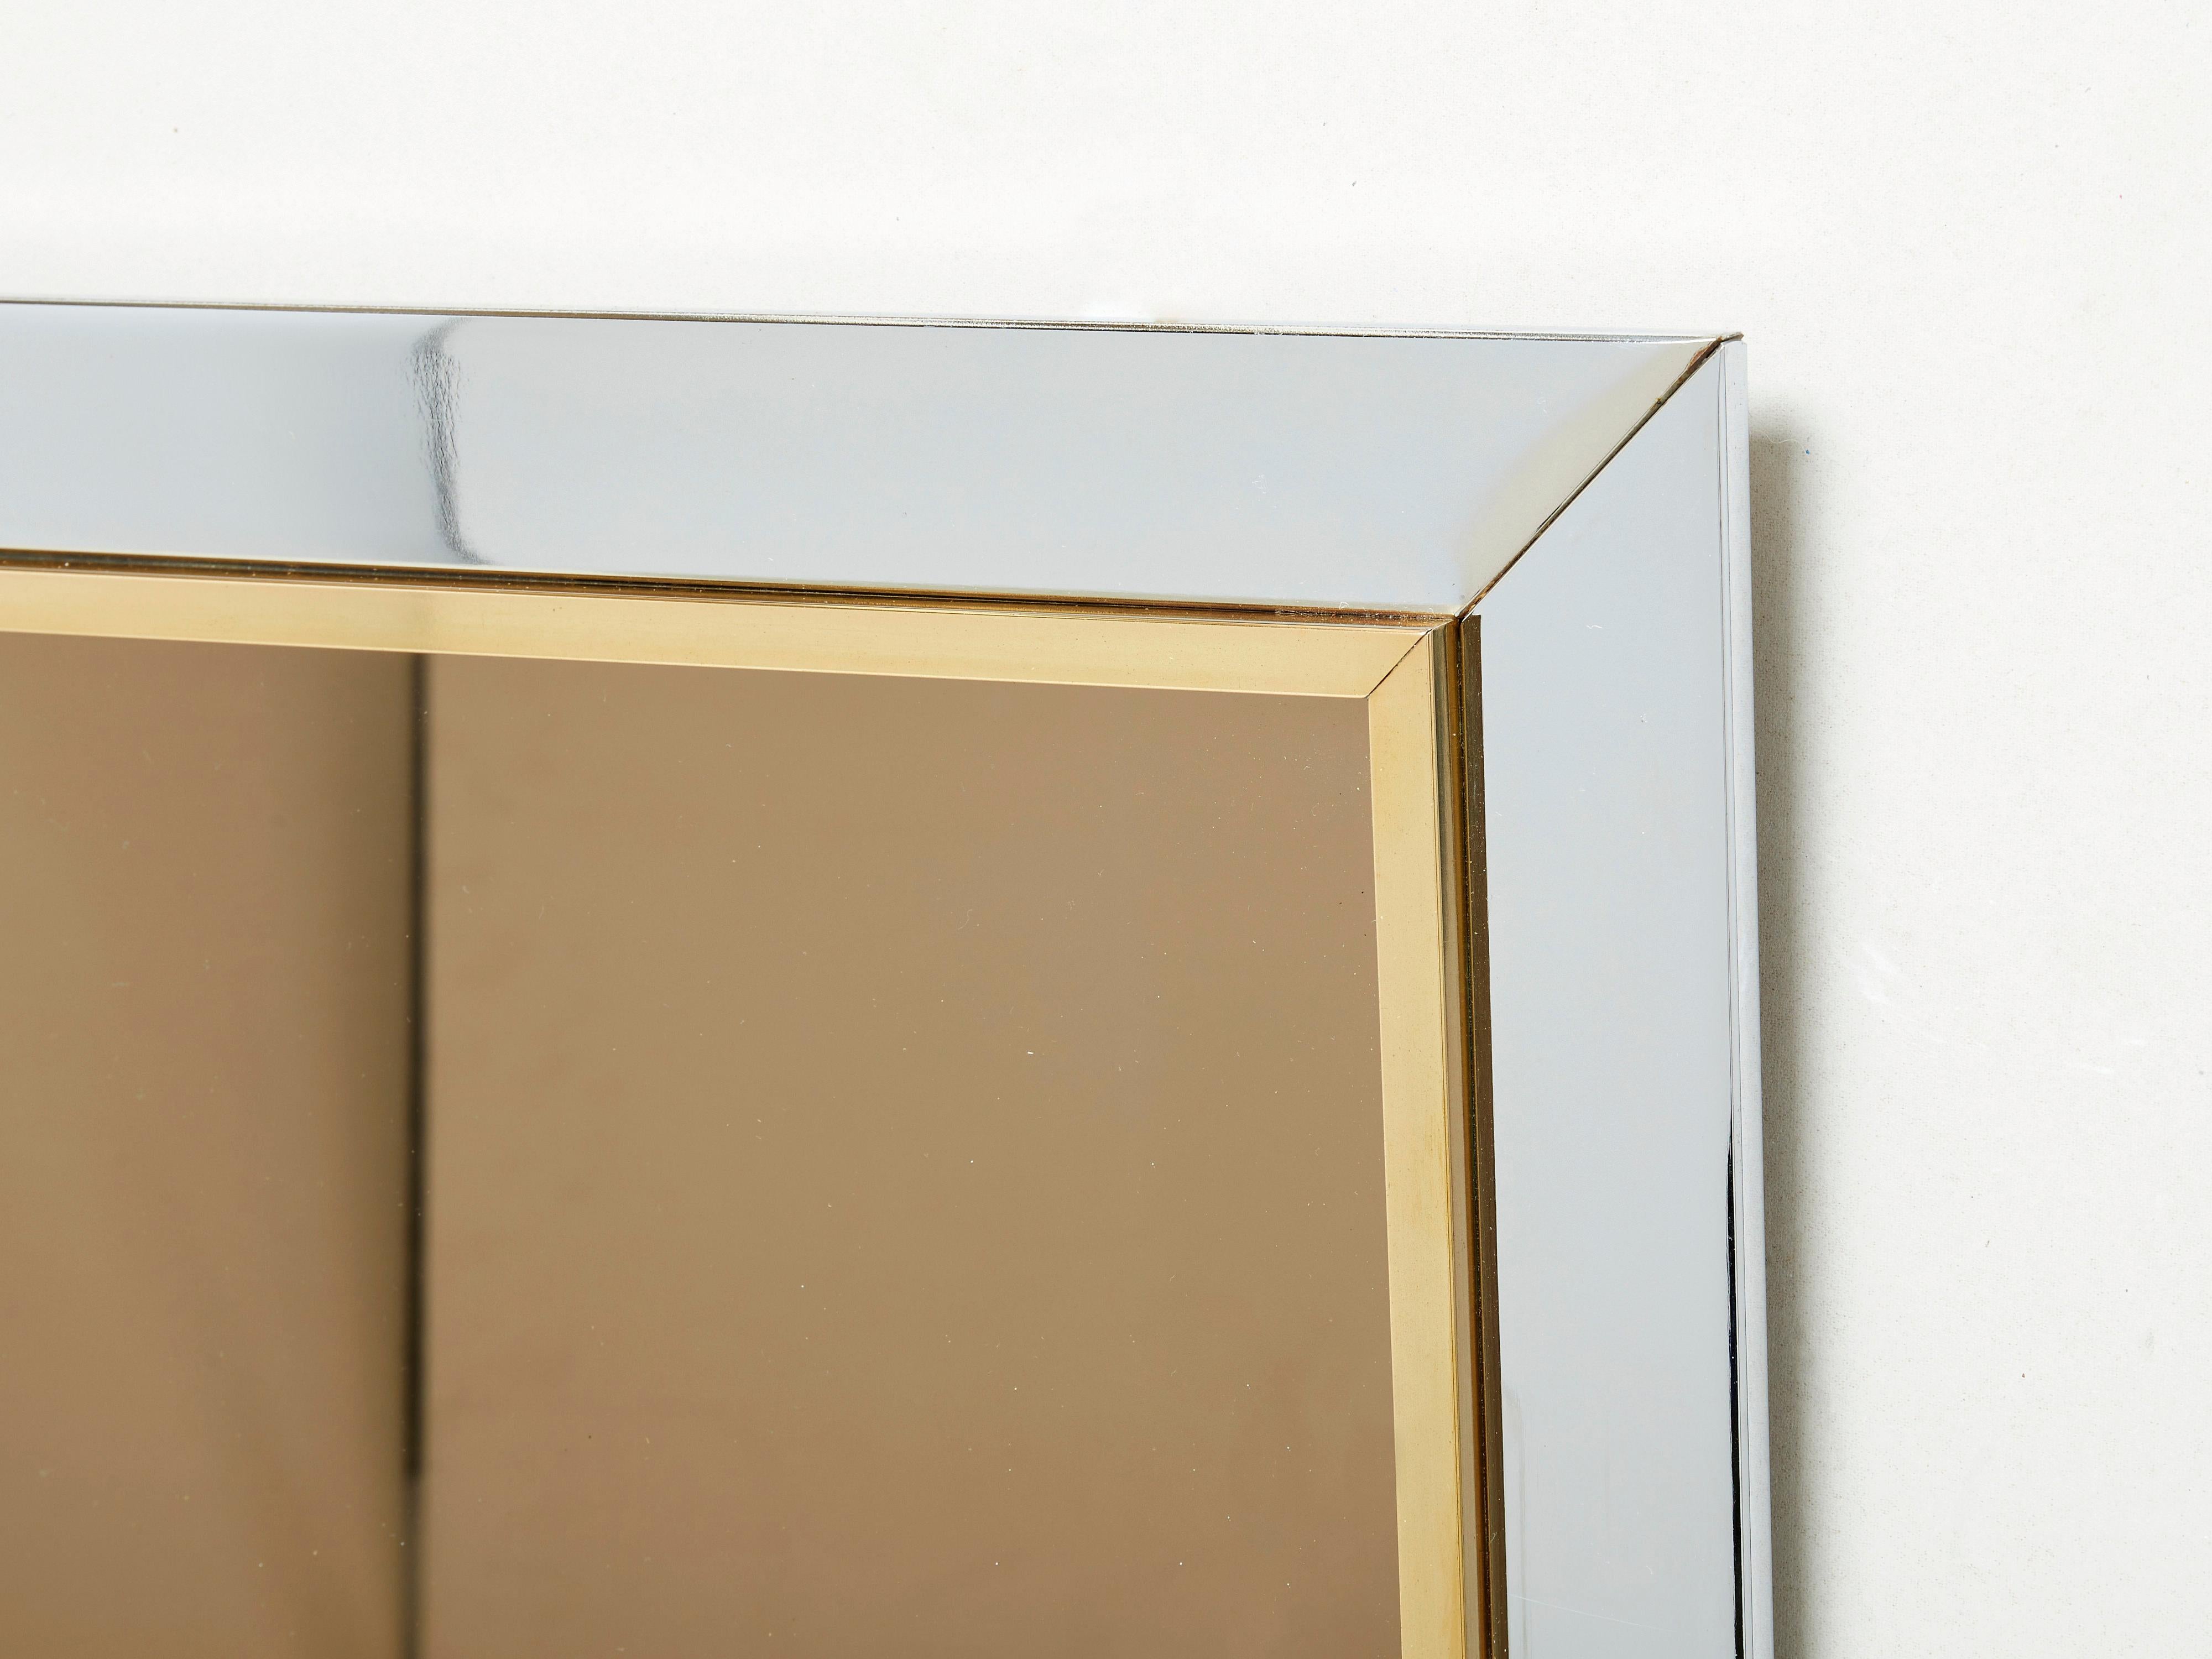 With its strong geometric design, this statement mirror is typical of Belgian design firm Belgo chrome. Its imposing chrome and brass border surrounds the smoky bronze mirror, creating a chic, timeless, 1970s vibes piece. Found in very good vintage